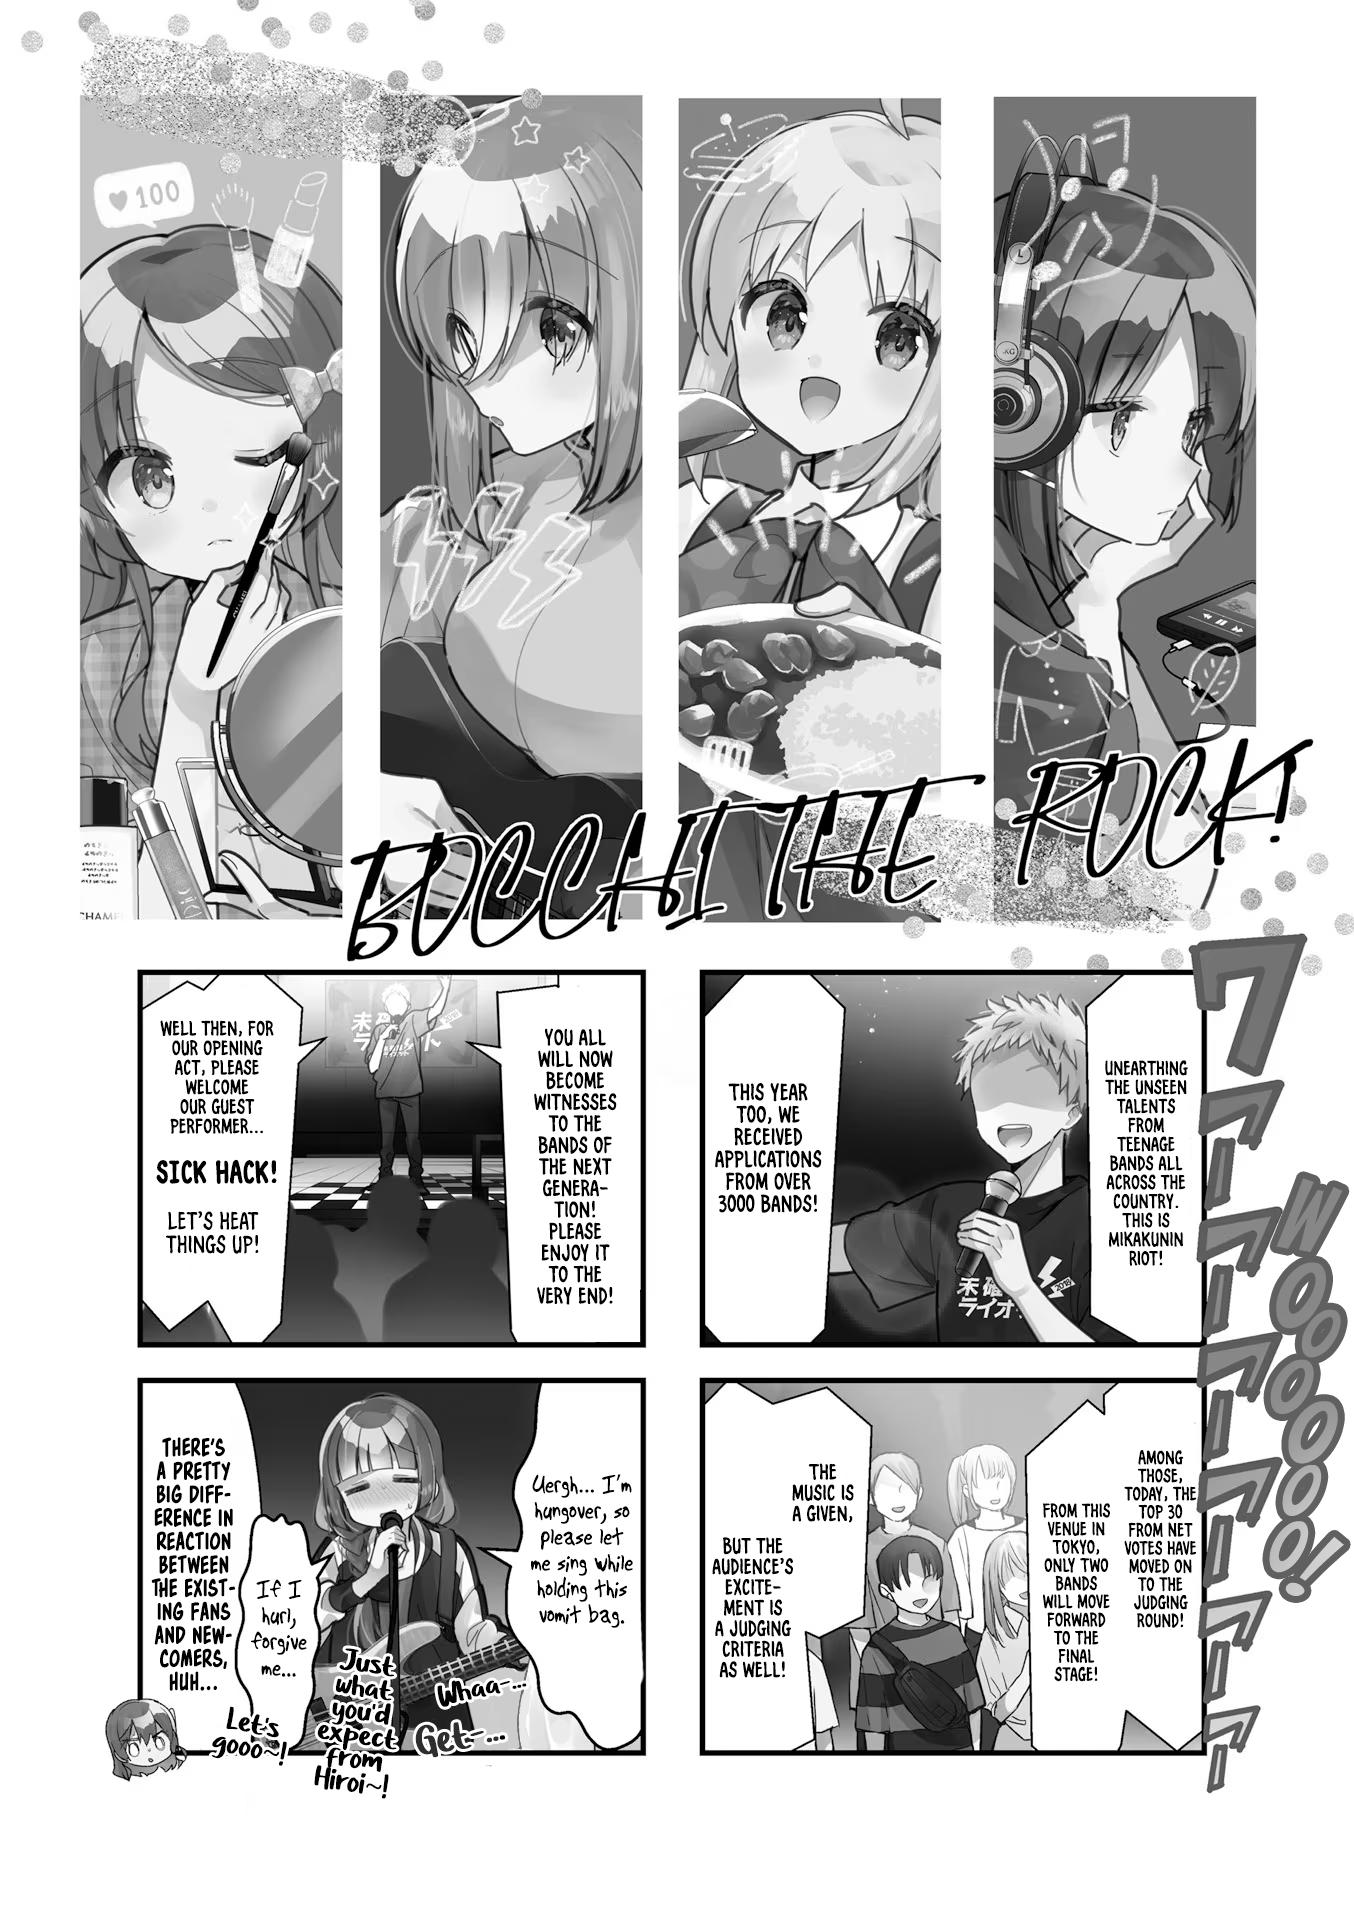 Bocchi The Rock  Chapter 44 page 3 - 